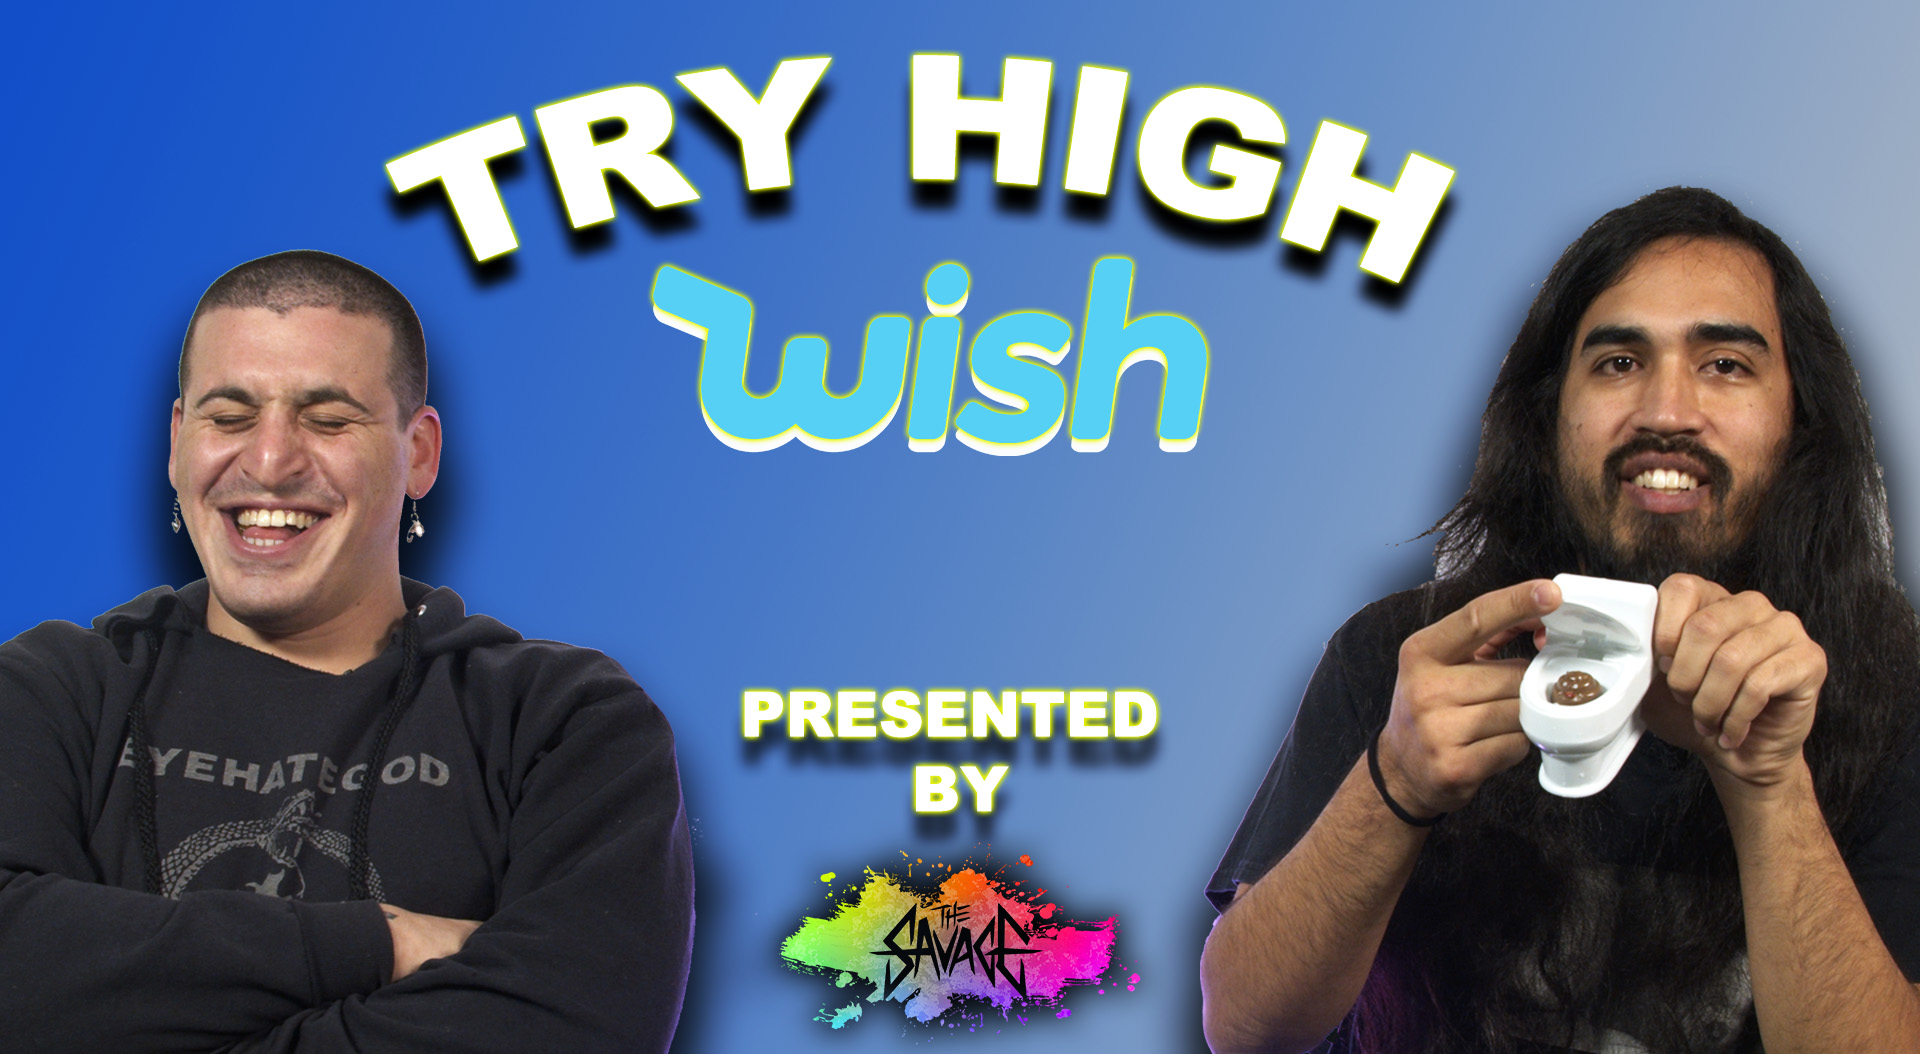 People Try Even MORE Wish Products High | TRY HIGH